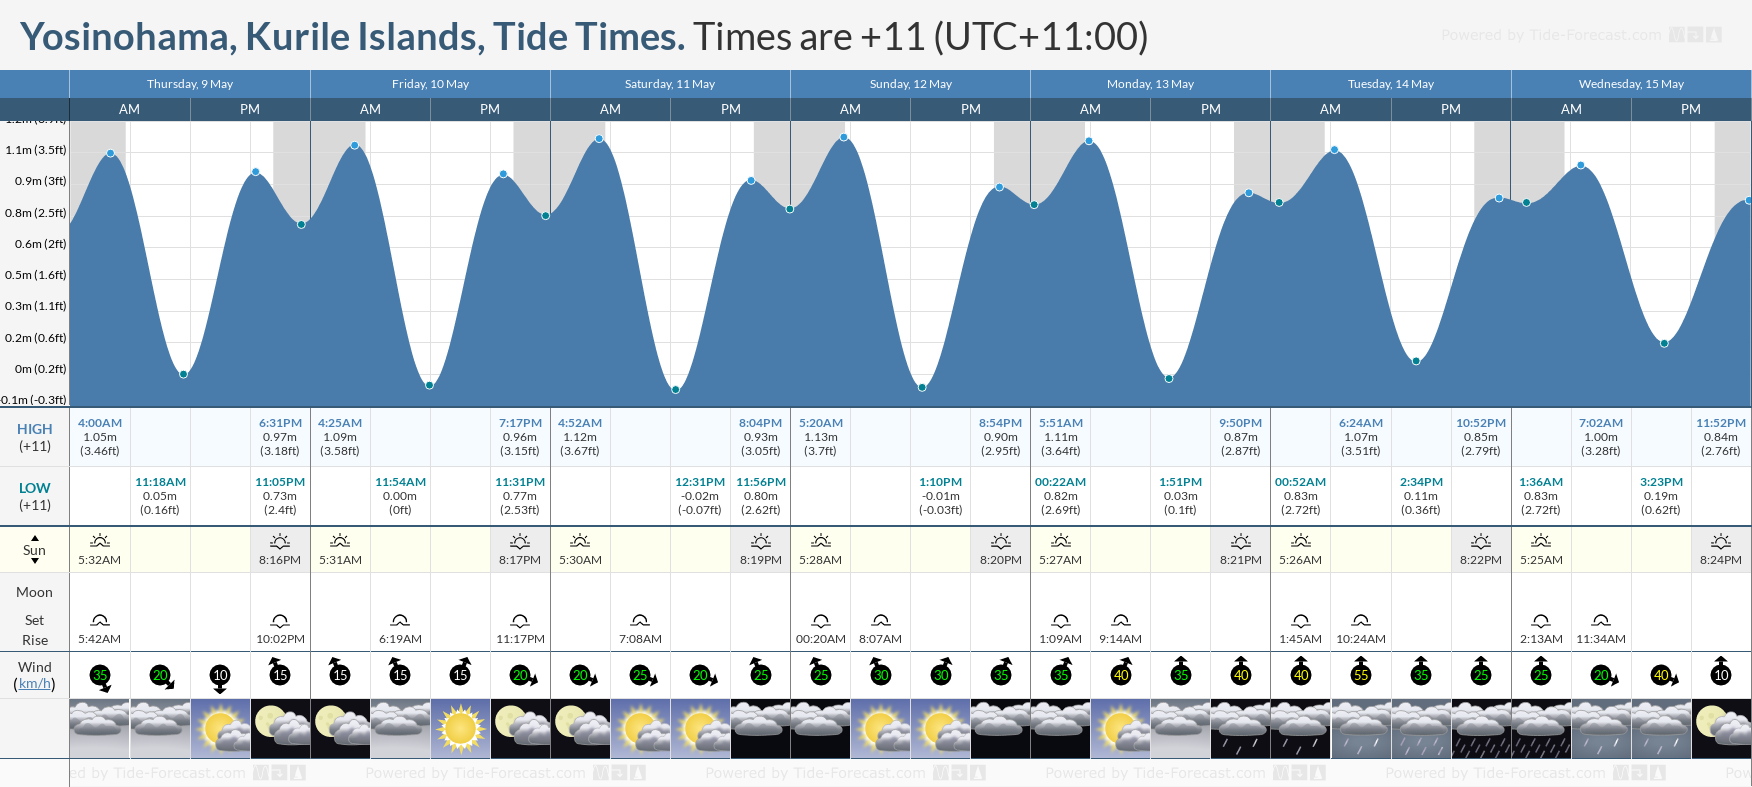 Yosinohama, Kurile Islands Tide Chart including high and low tide tide times for the next 7 days